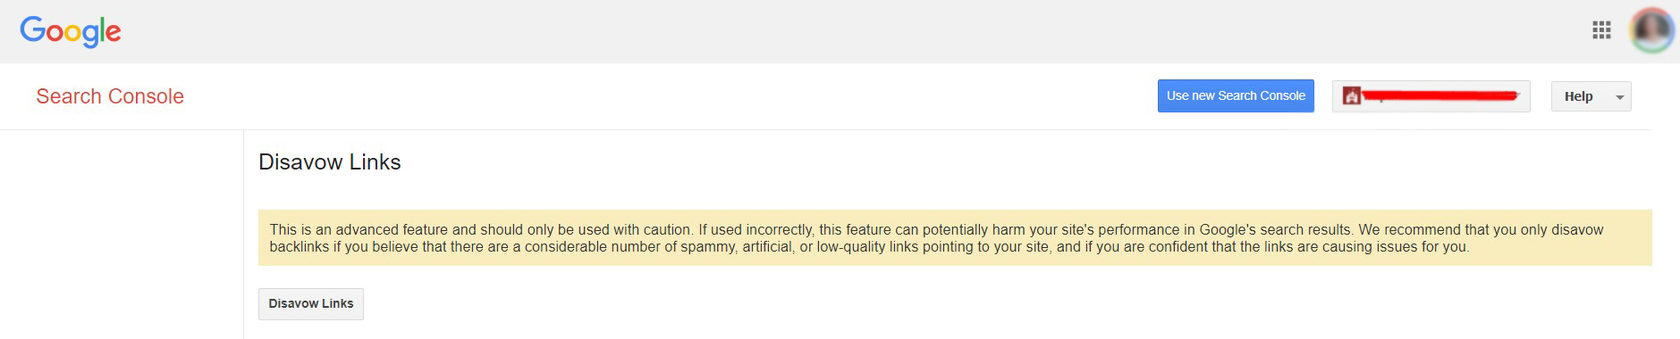 How to disavow links in Google search console